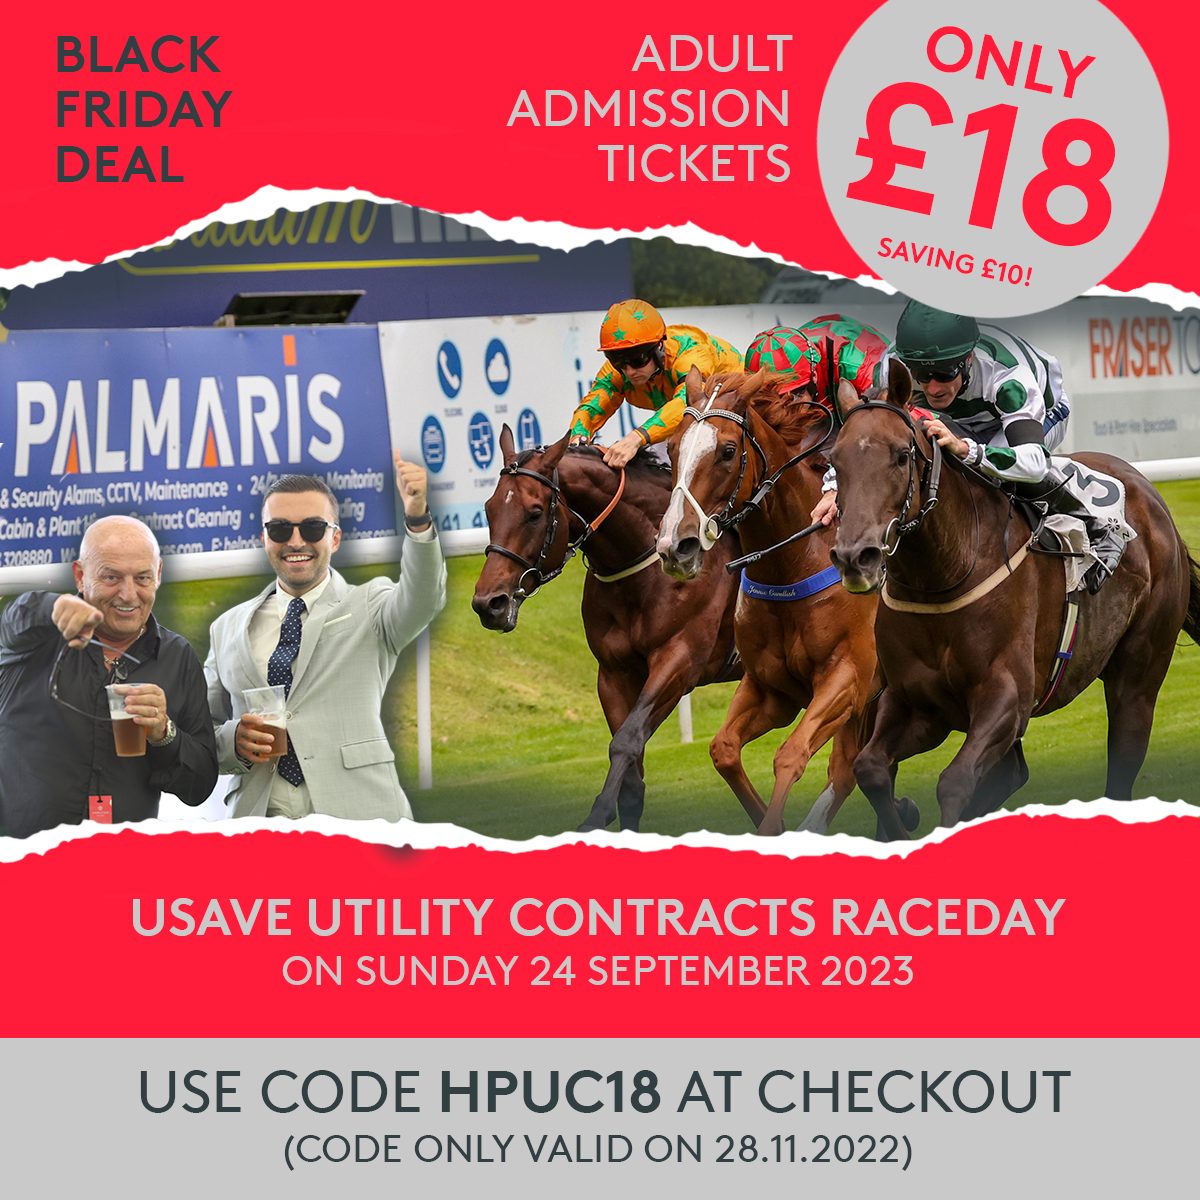 Black Friday Deal £18 tickets for Usave Utility Contracts Raceday 2023